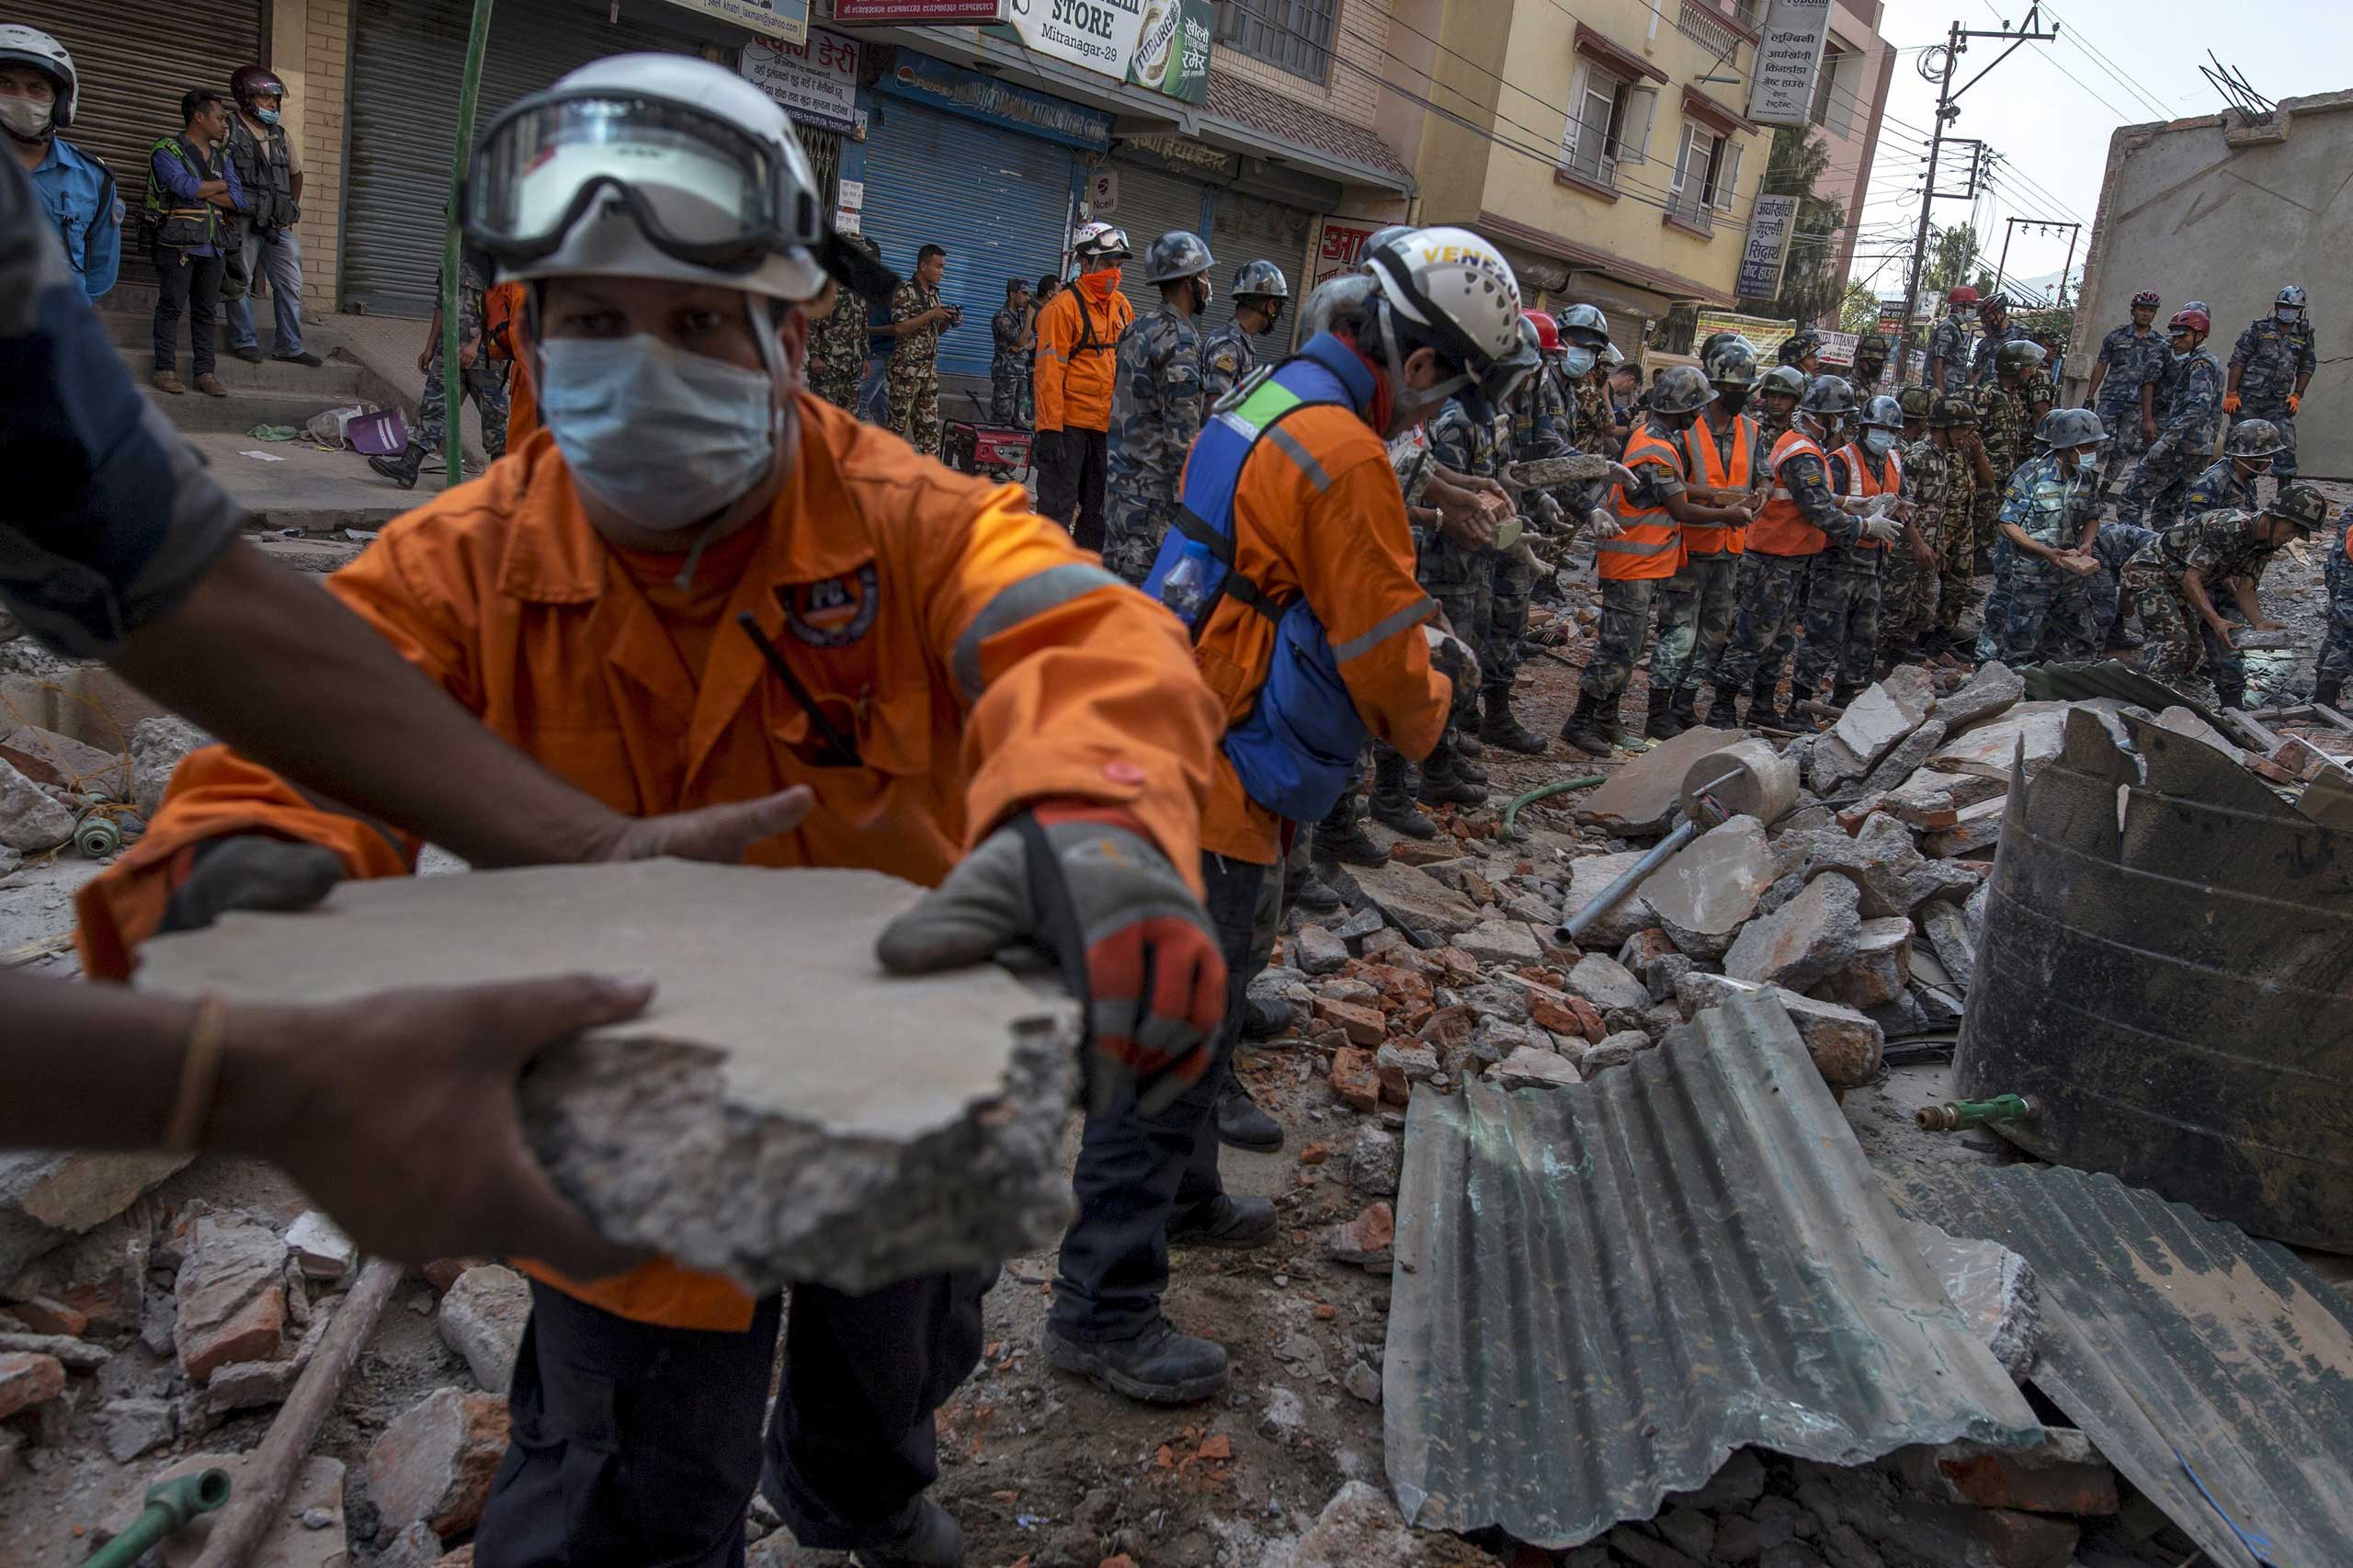 Nepalese military personnel remove debris in search of survivors after a fresh 7.3 earthquake struck, in Kathmandu on May 12, 2015. (Athit Perawongmetha—Reuters)